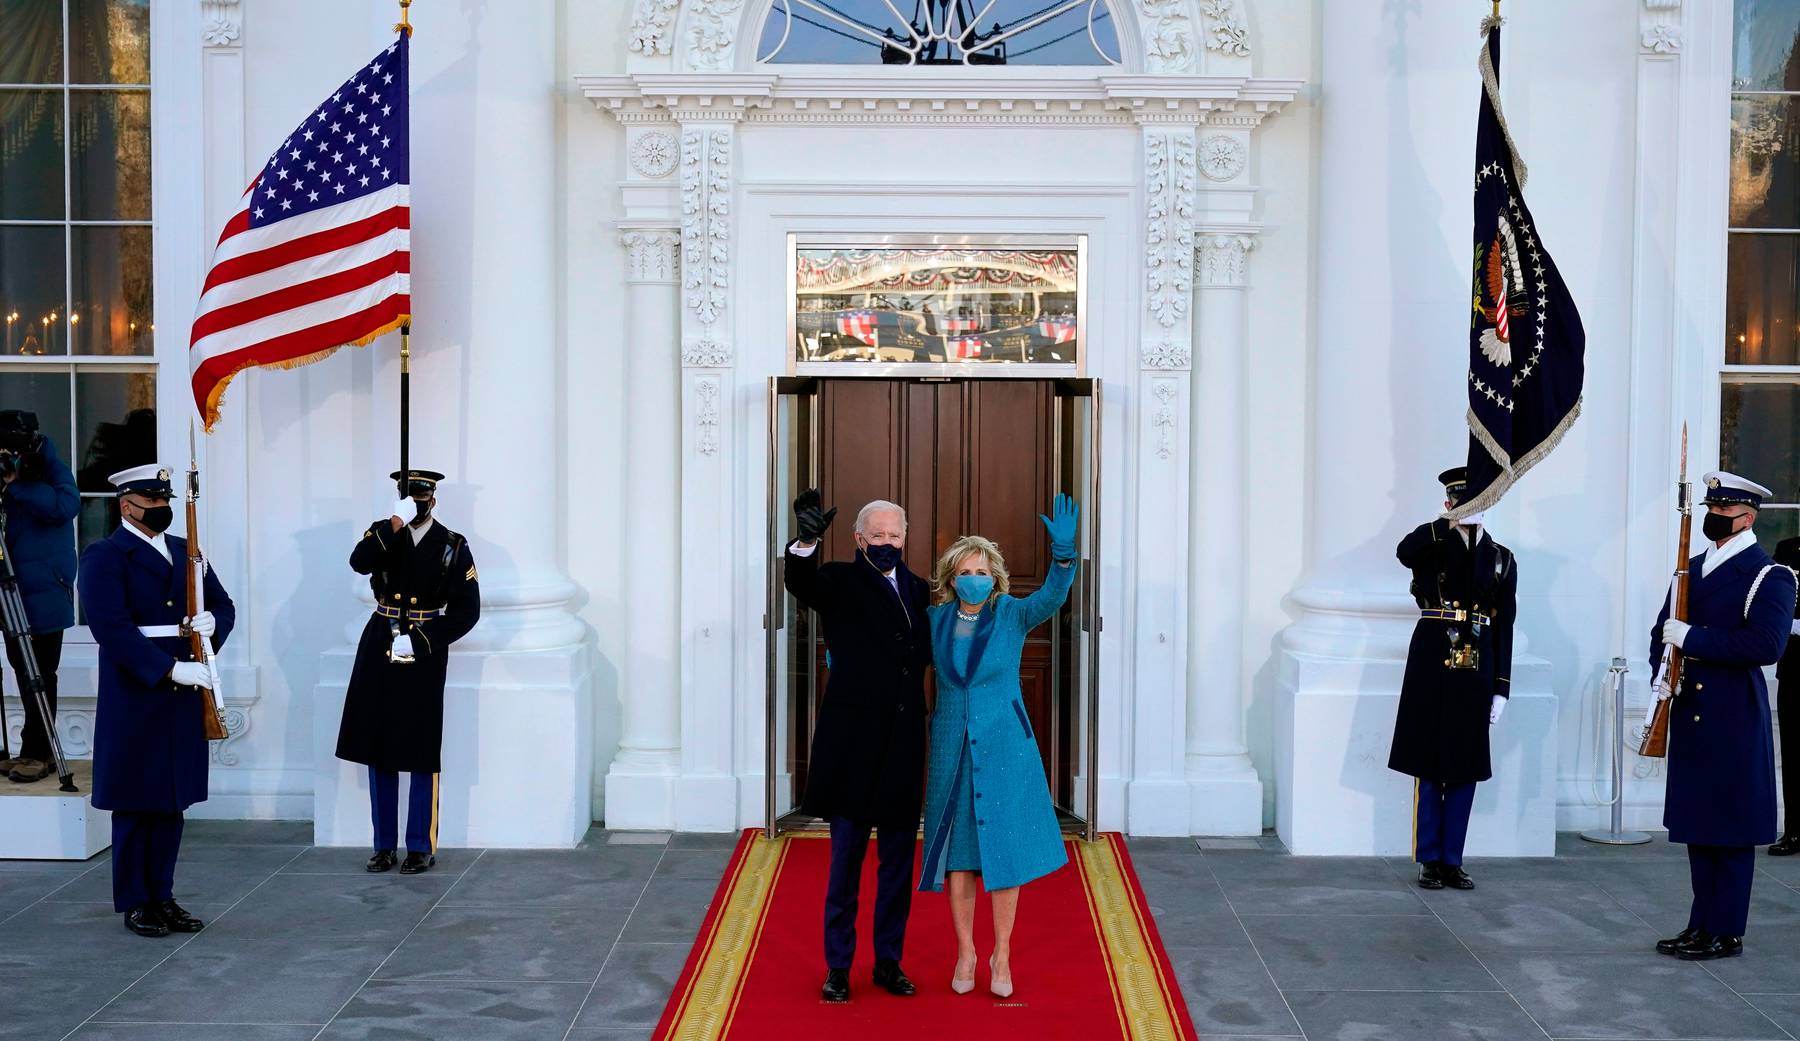 US President Joe Biden and US First Lady Jill Biden wave as they arrive at the White House. Alex Brandon AFP via Getty Images